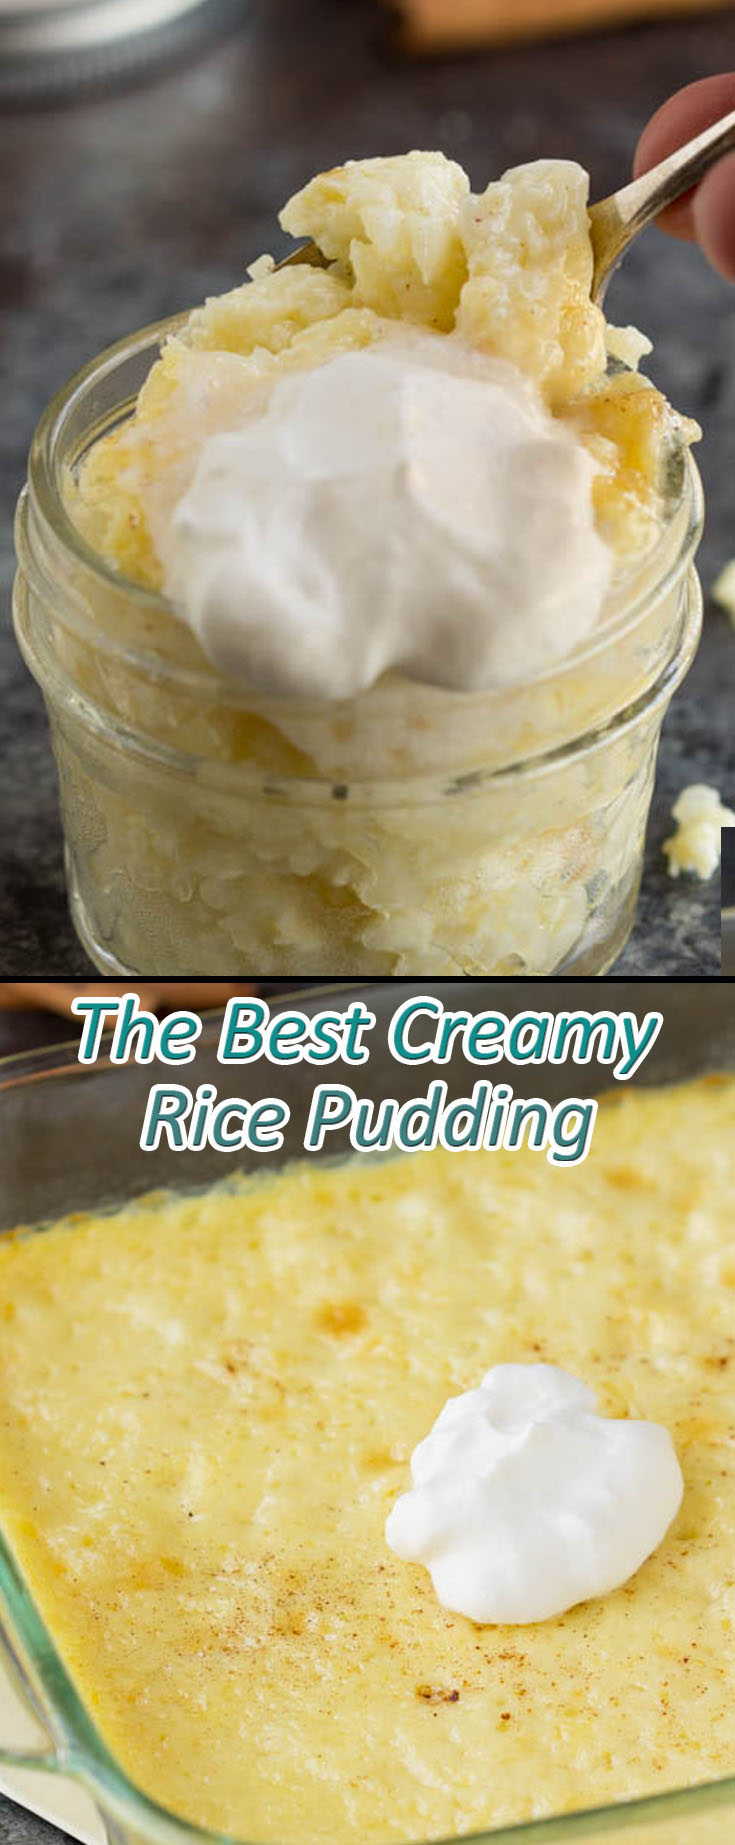 The Best Creamy Rice Pudding